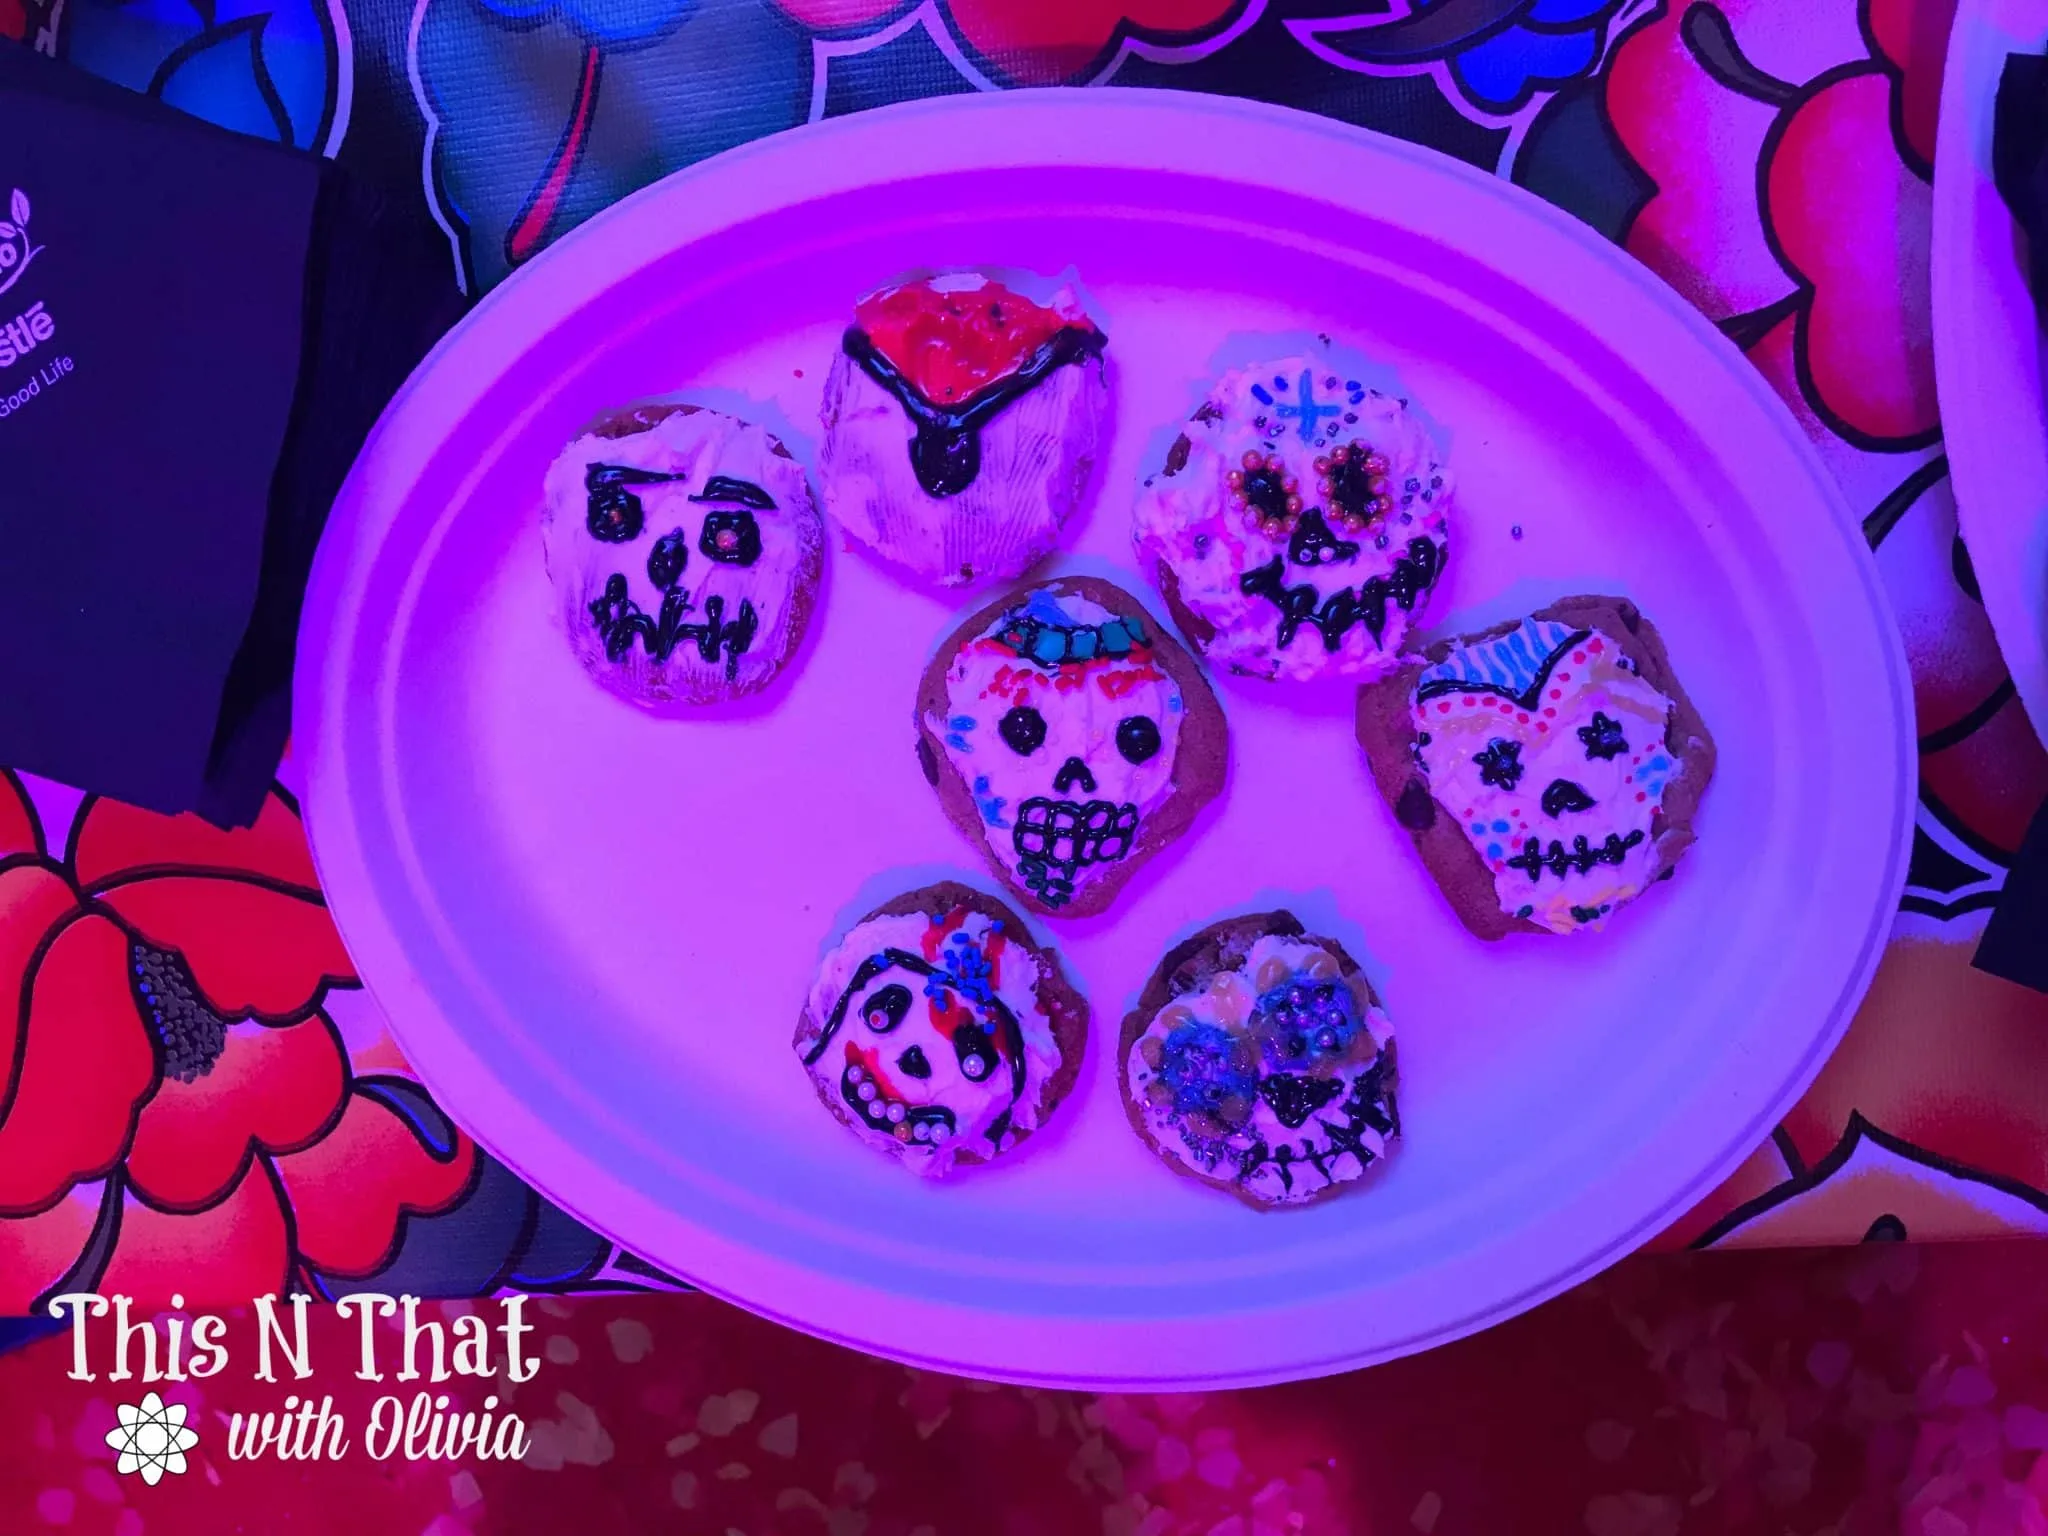 Pixar Coco Premiere Experience + Movie Review! #PixarCocoEvent